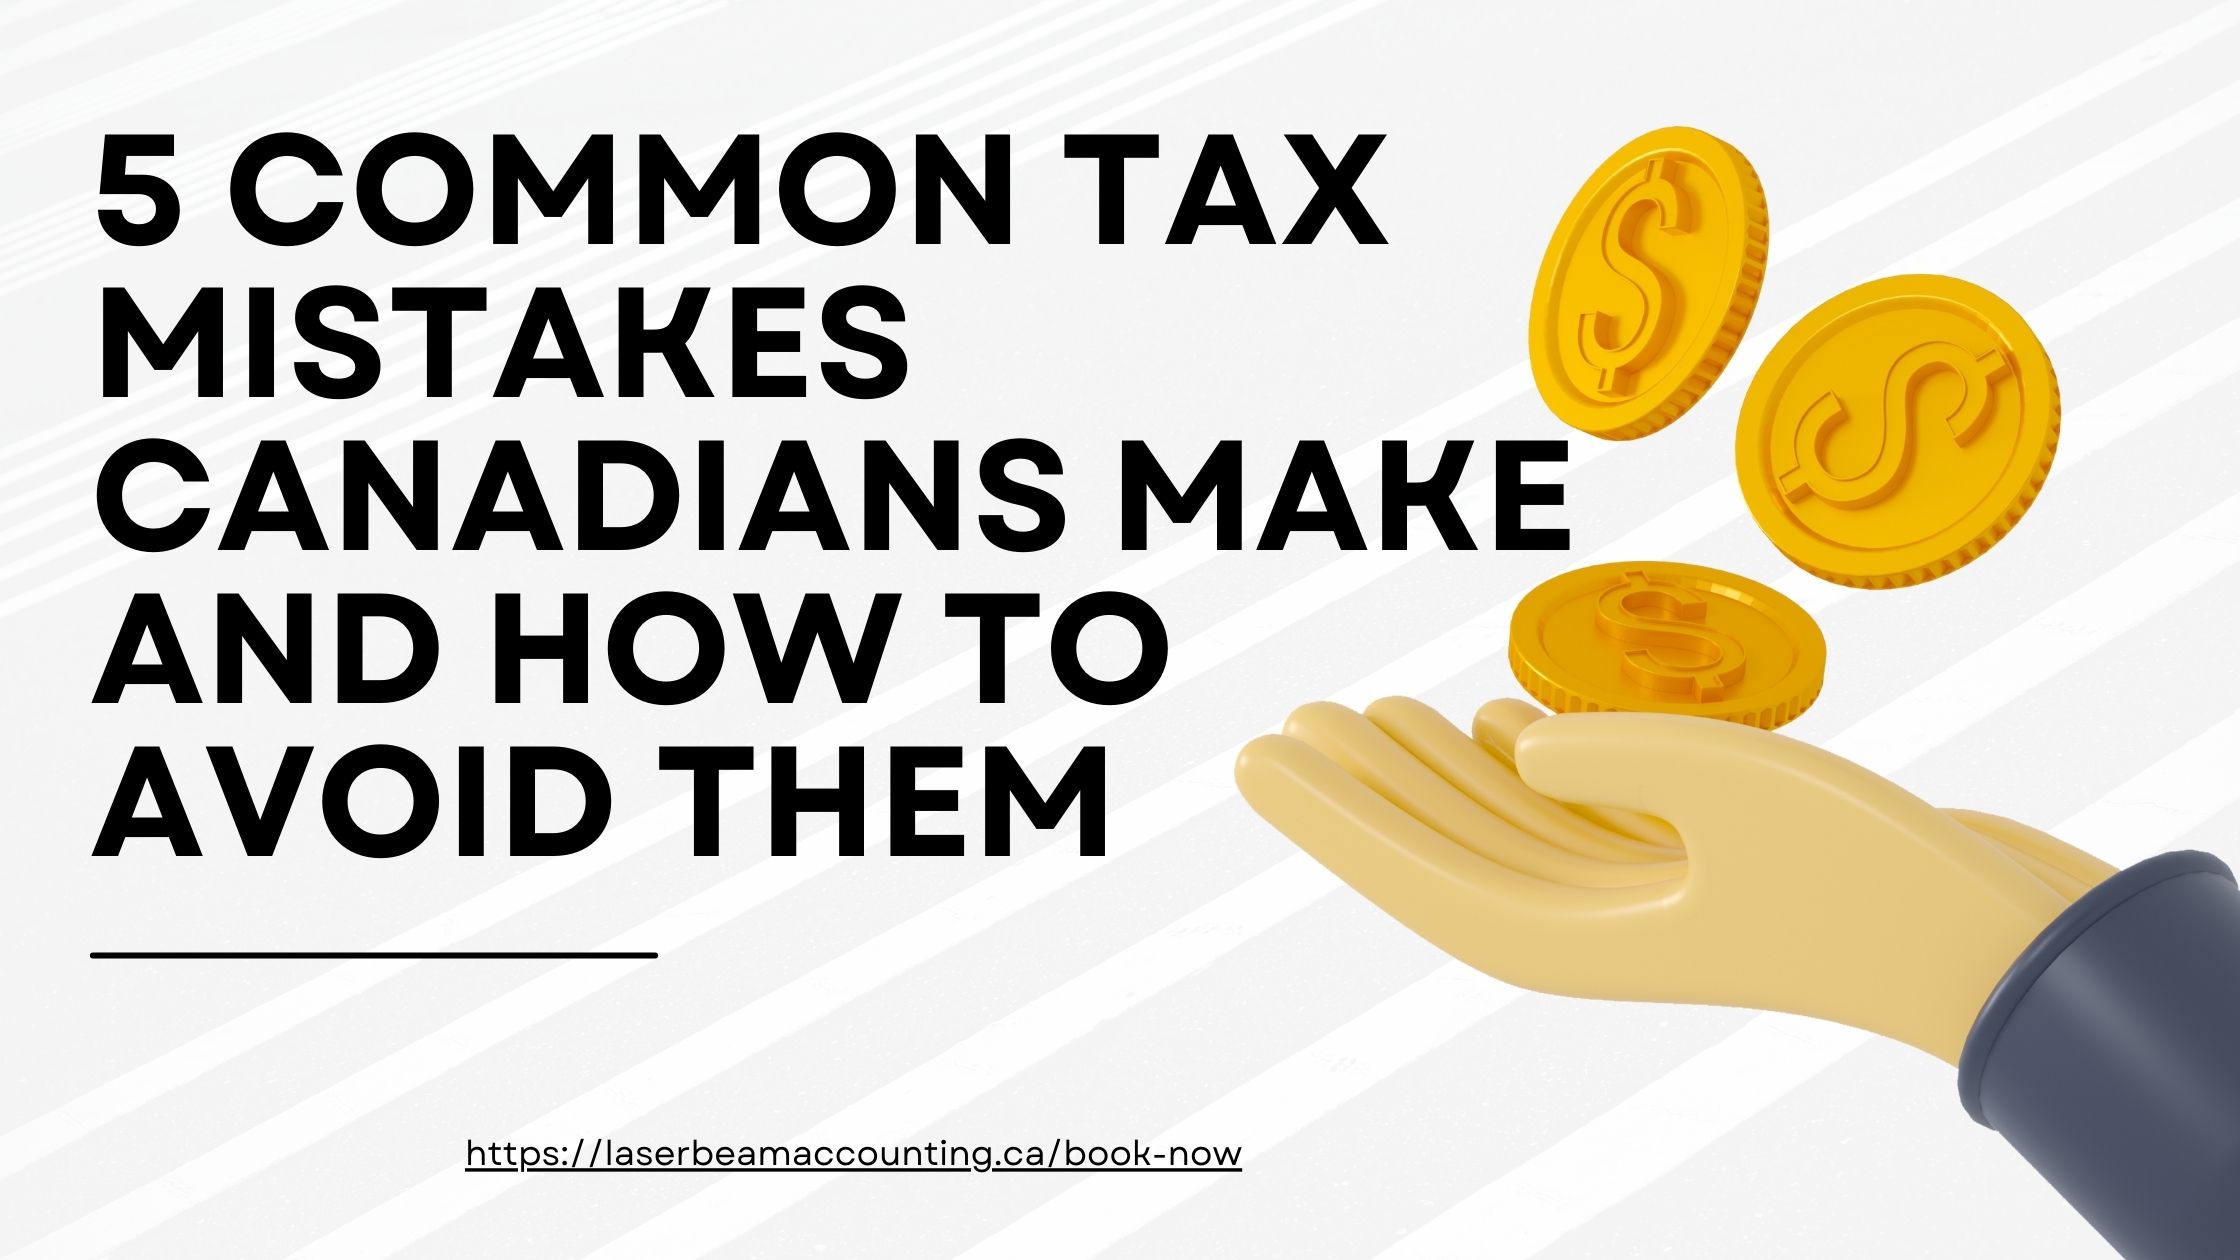 5 Common Tax Mistakes Canadians Make and How to Avoid Them